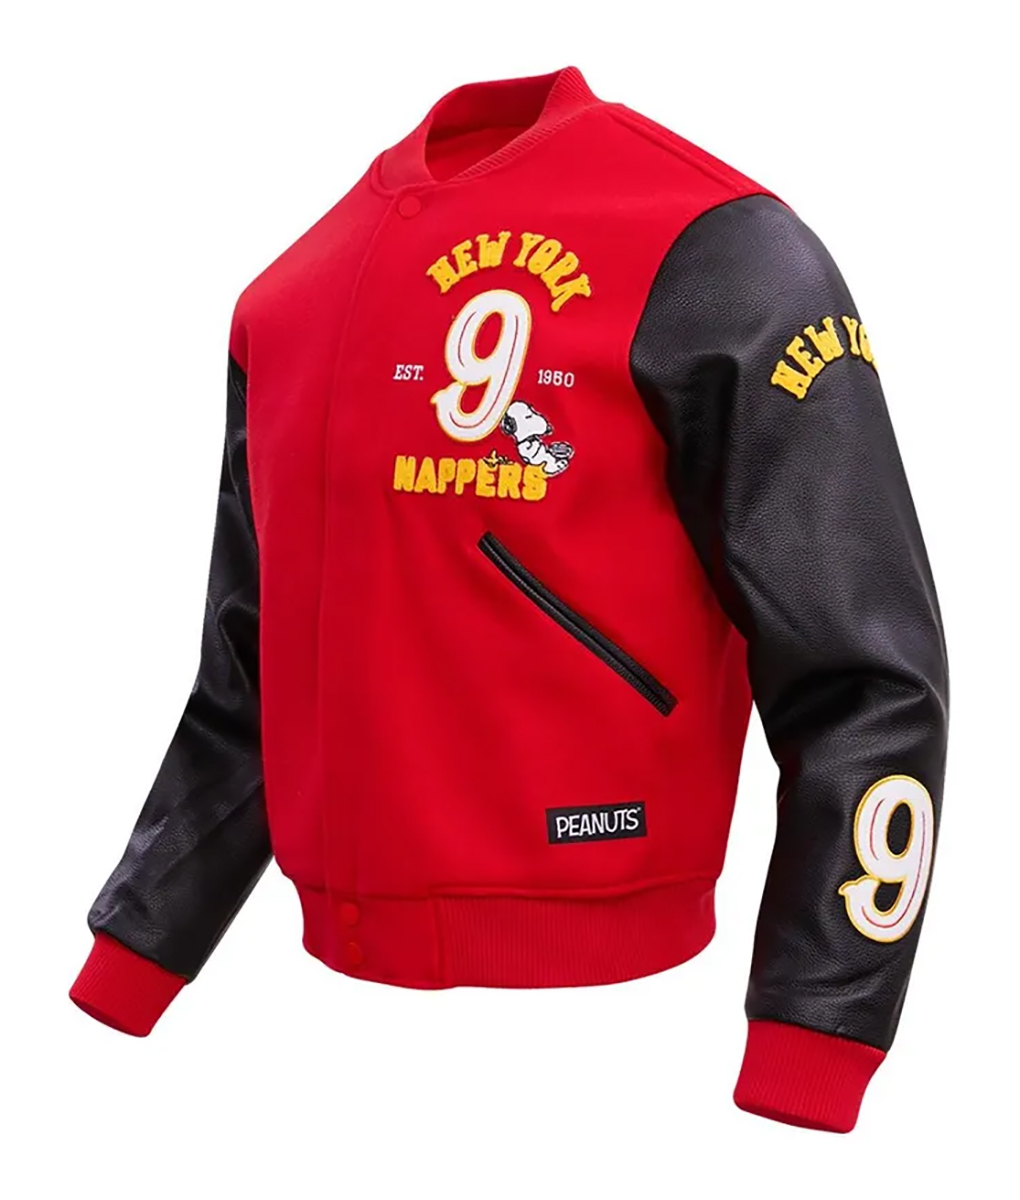 Snoopy New York Nappers Red Varsity Jacket (4)